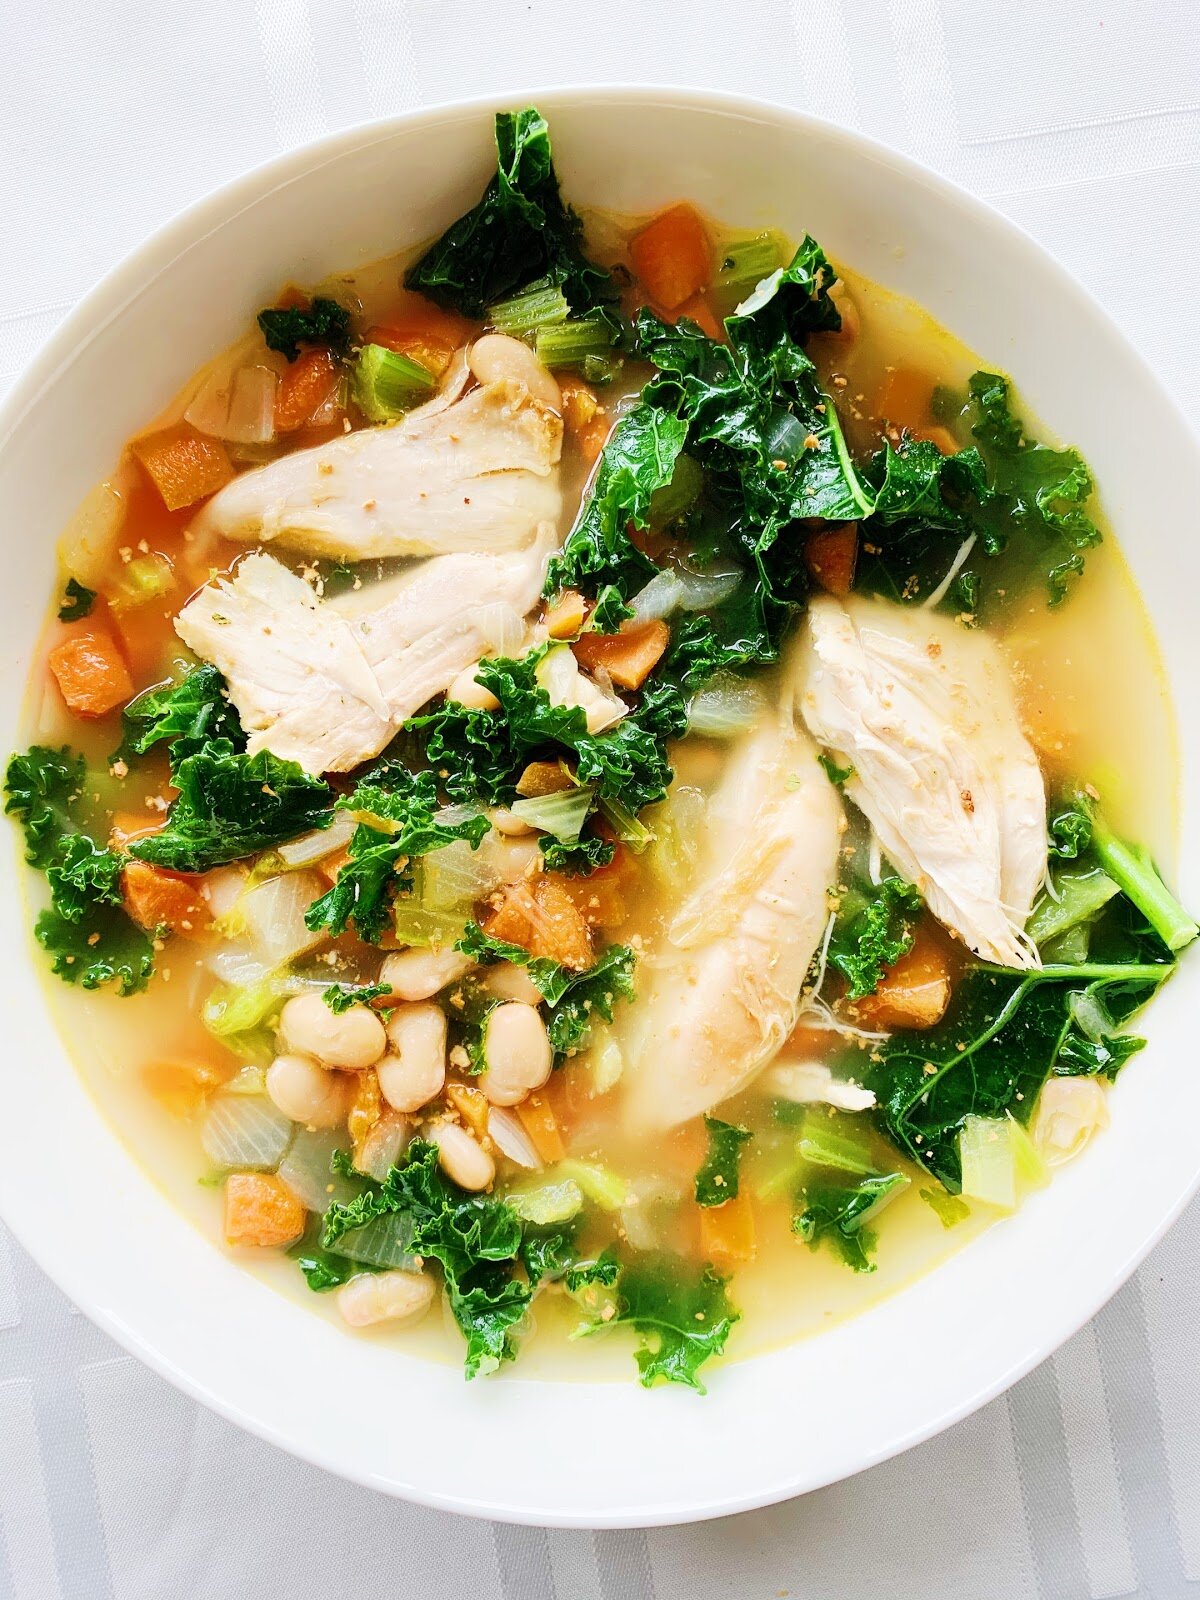 Soups to eat when you're sick